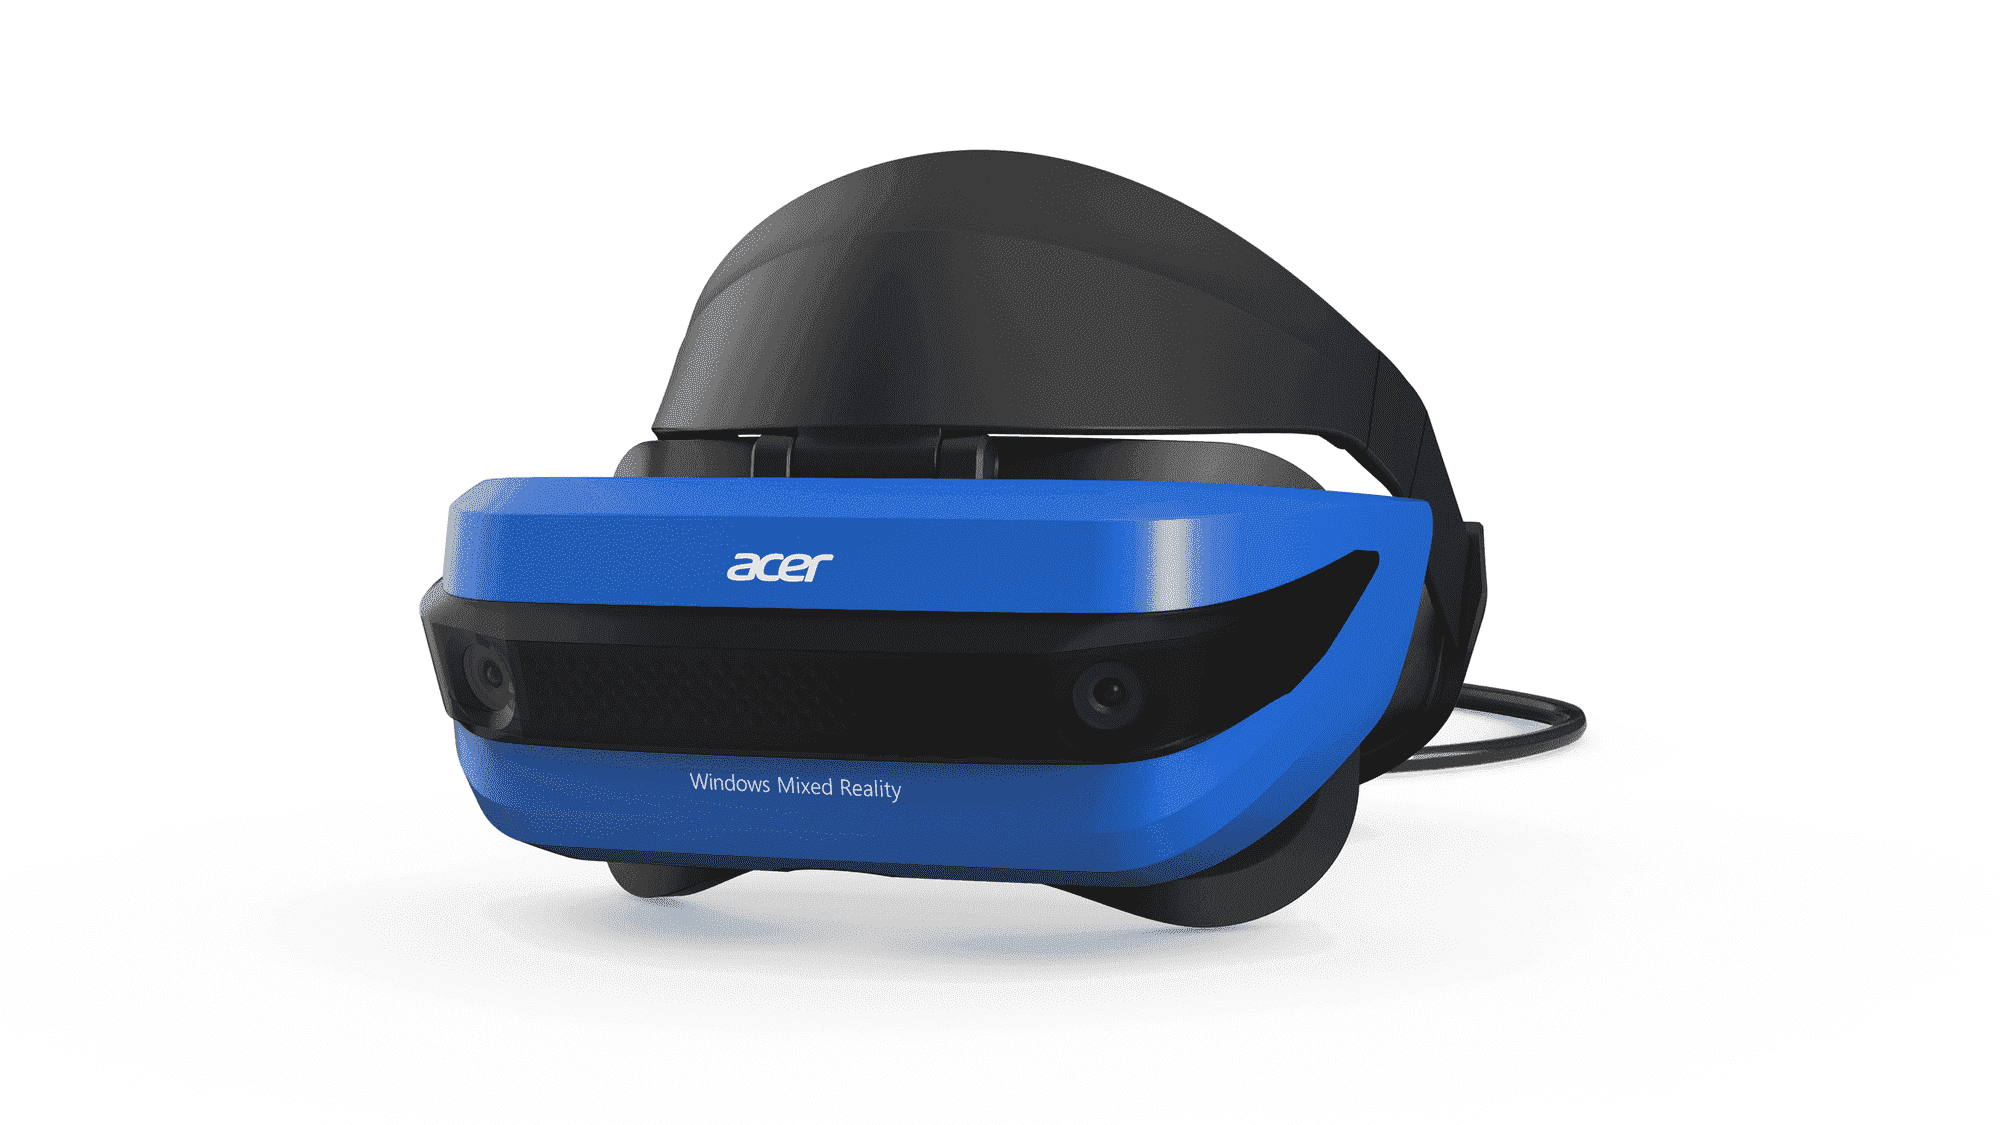 Samsung HMD Odyssey+ Windows Mixed Reality headset spotted online cd13009711673e0292f486ebeeecf4ca.png